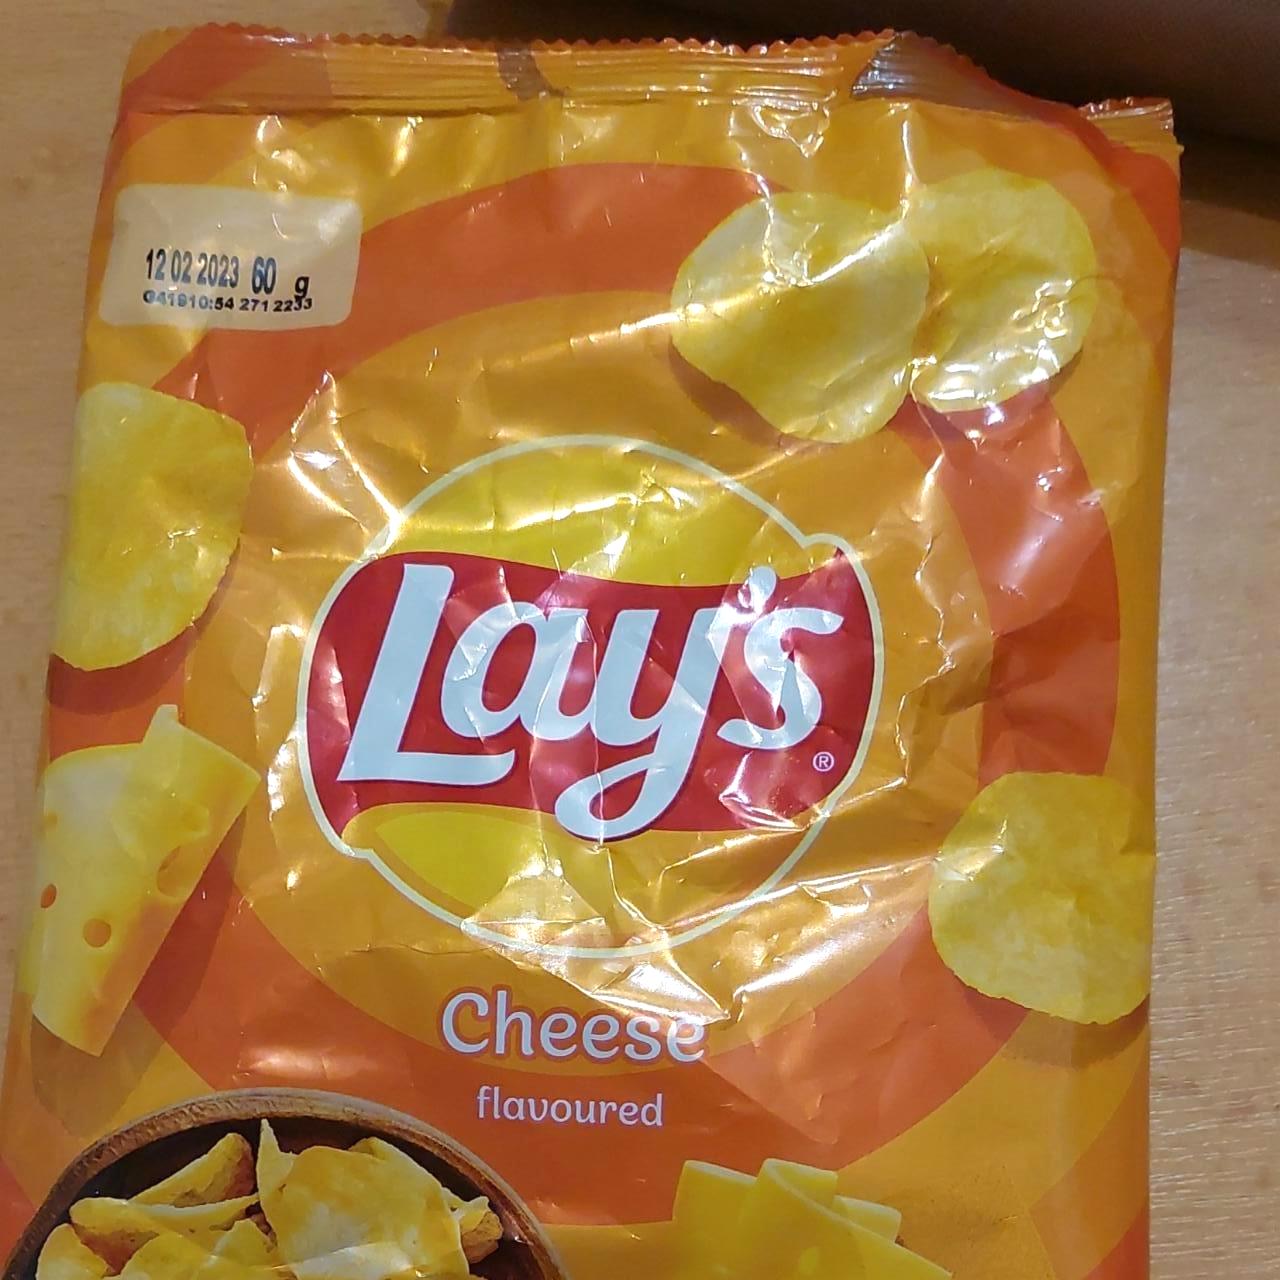 Képek - Lays Chips Cheese